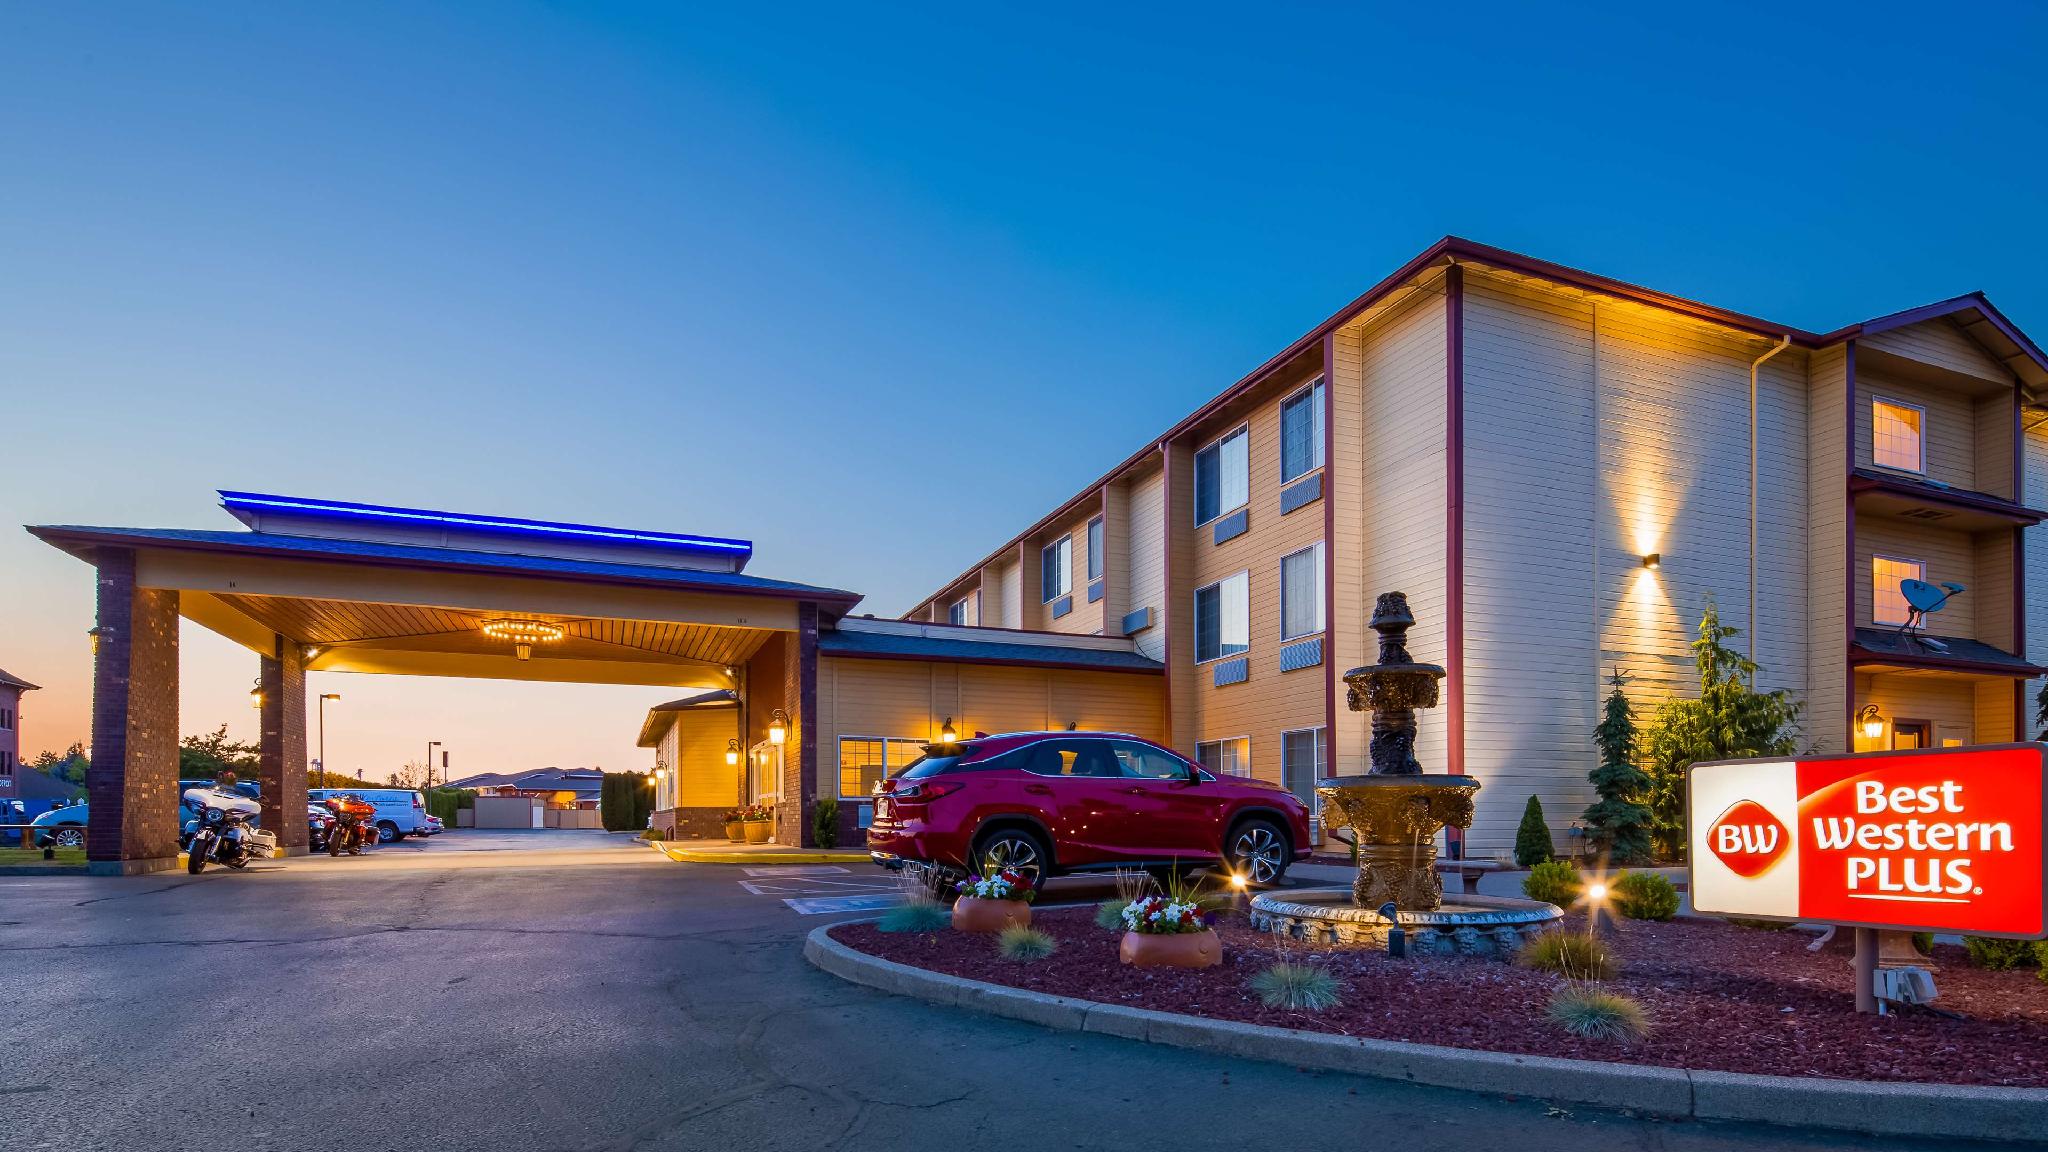 Best Western Plus guest entry for loading and unloading and fountain